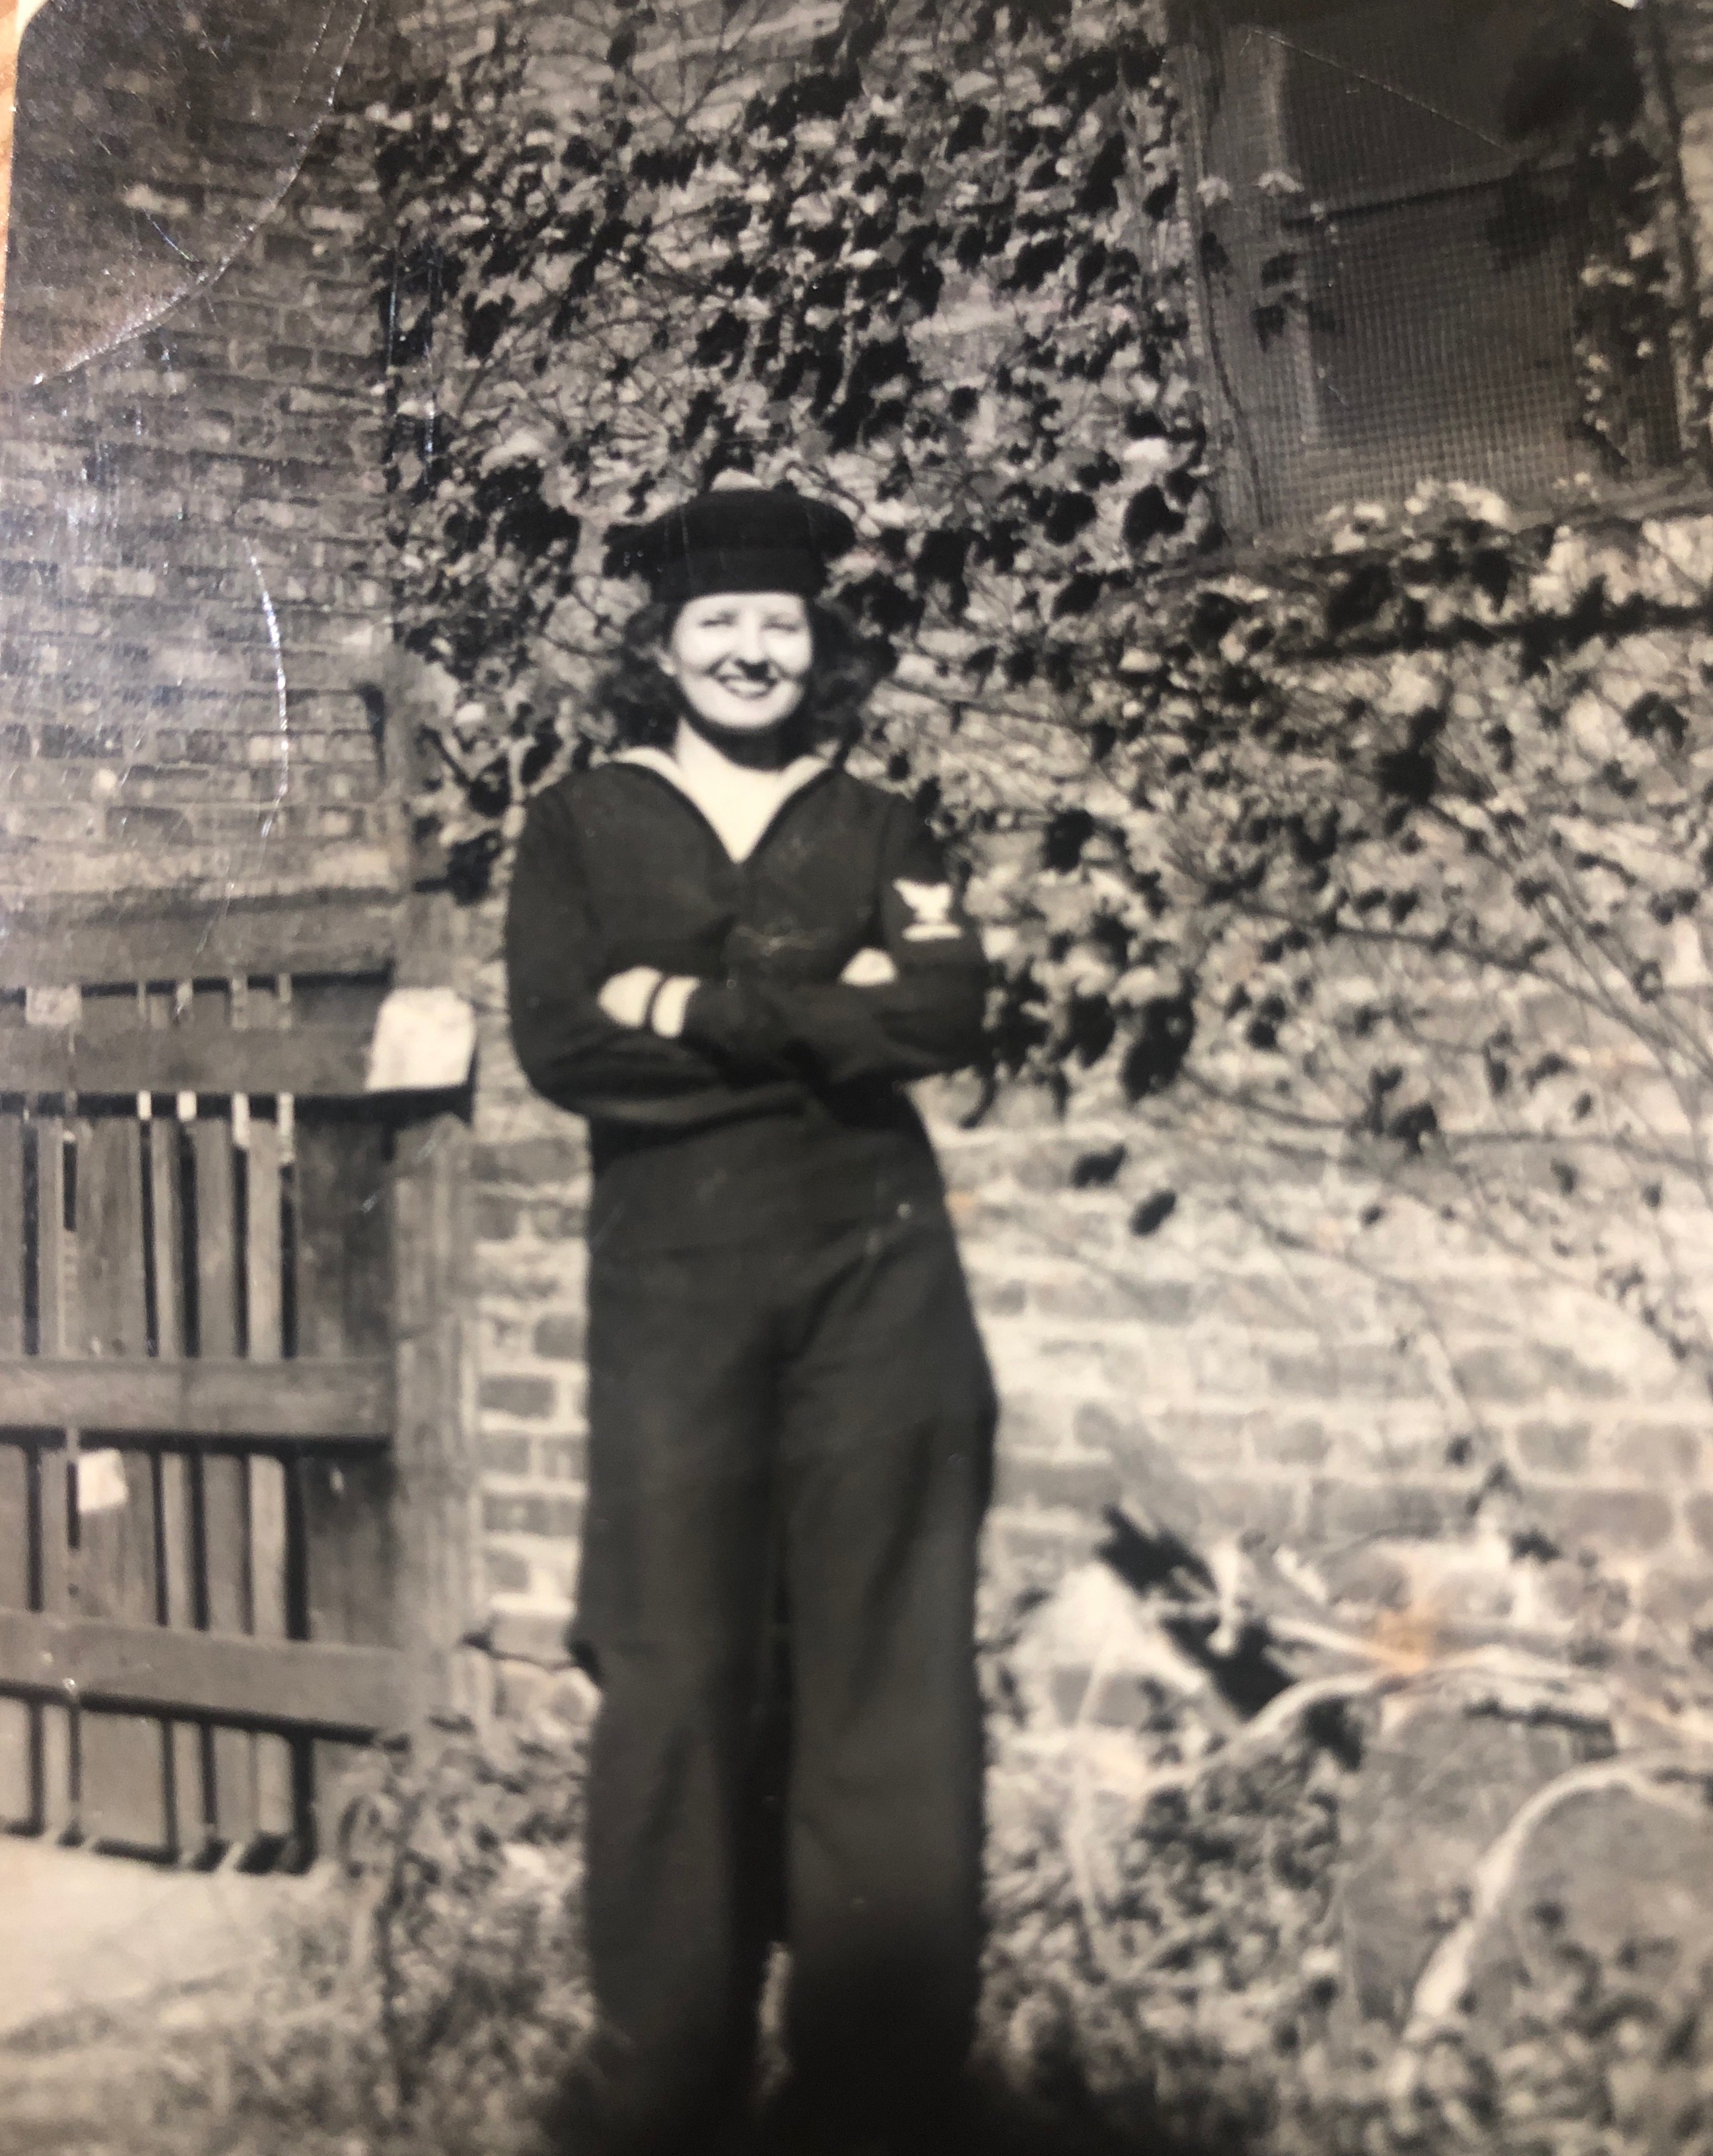 My mother Lillian Russell Shuey in my father’s navy uniform. Circa 1943. My mother was 21 years old. Taken in Illinois. 